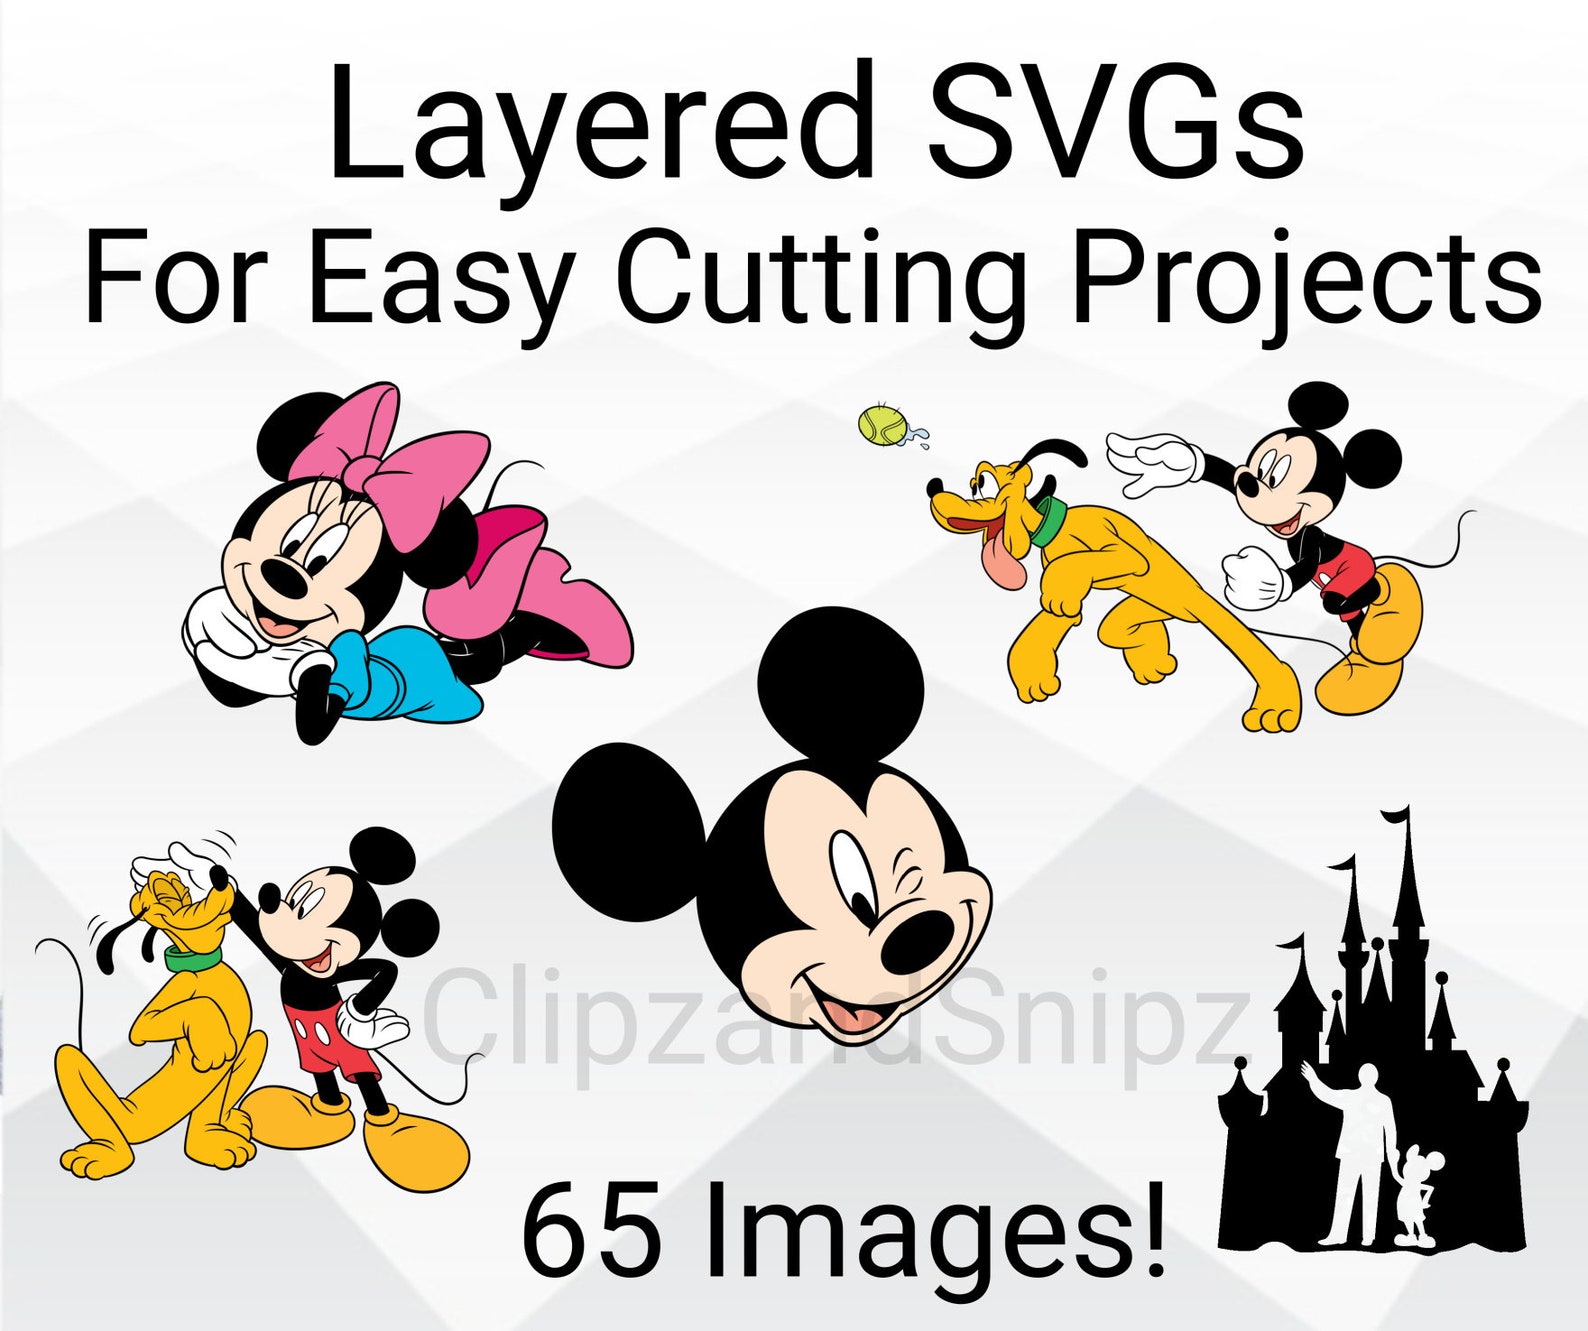 Layered SVGs for easy cutting project.